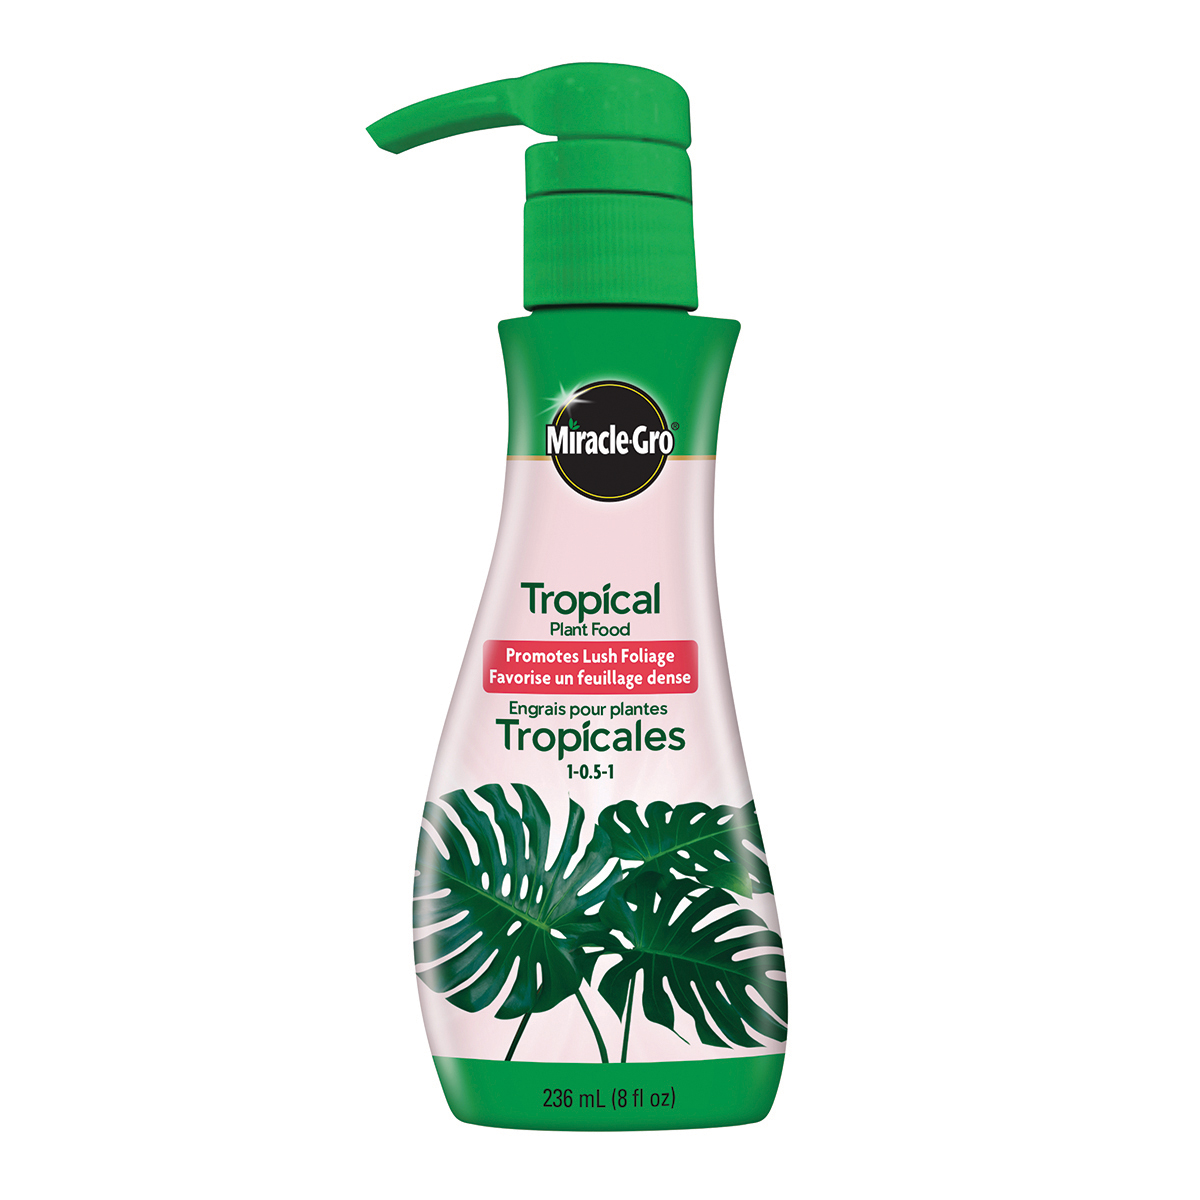 Picture of Miracle-Gro Tropical Plant Food 1-0.5-1 236mL